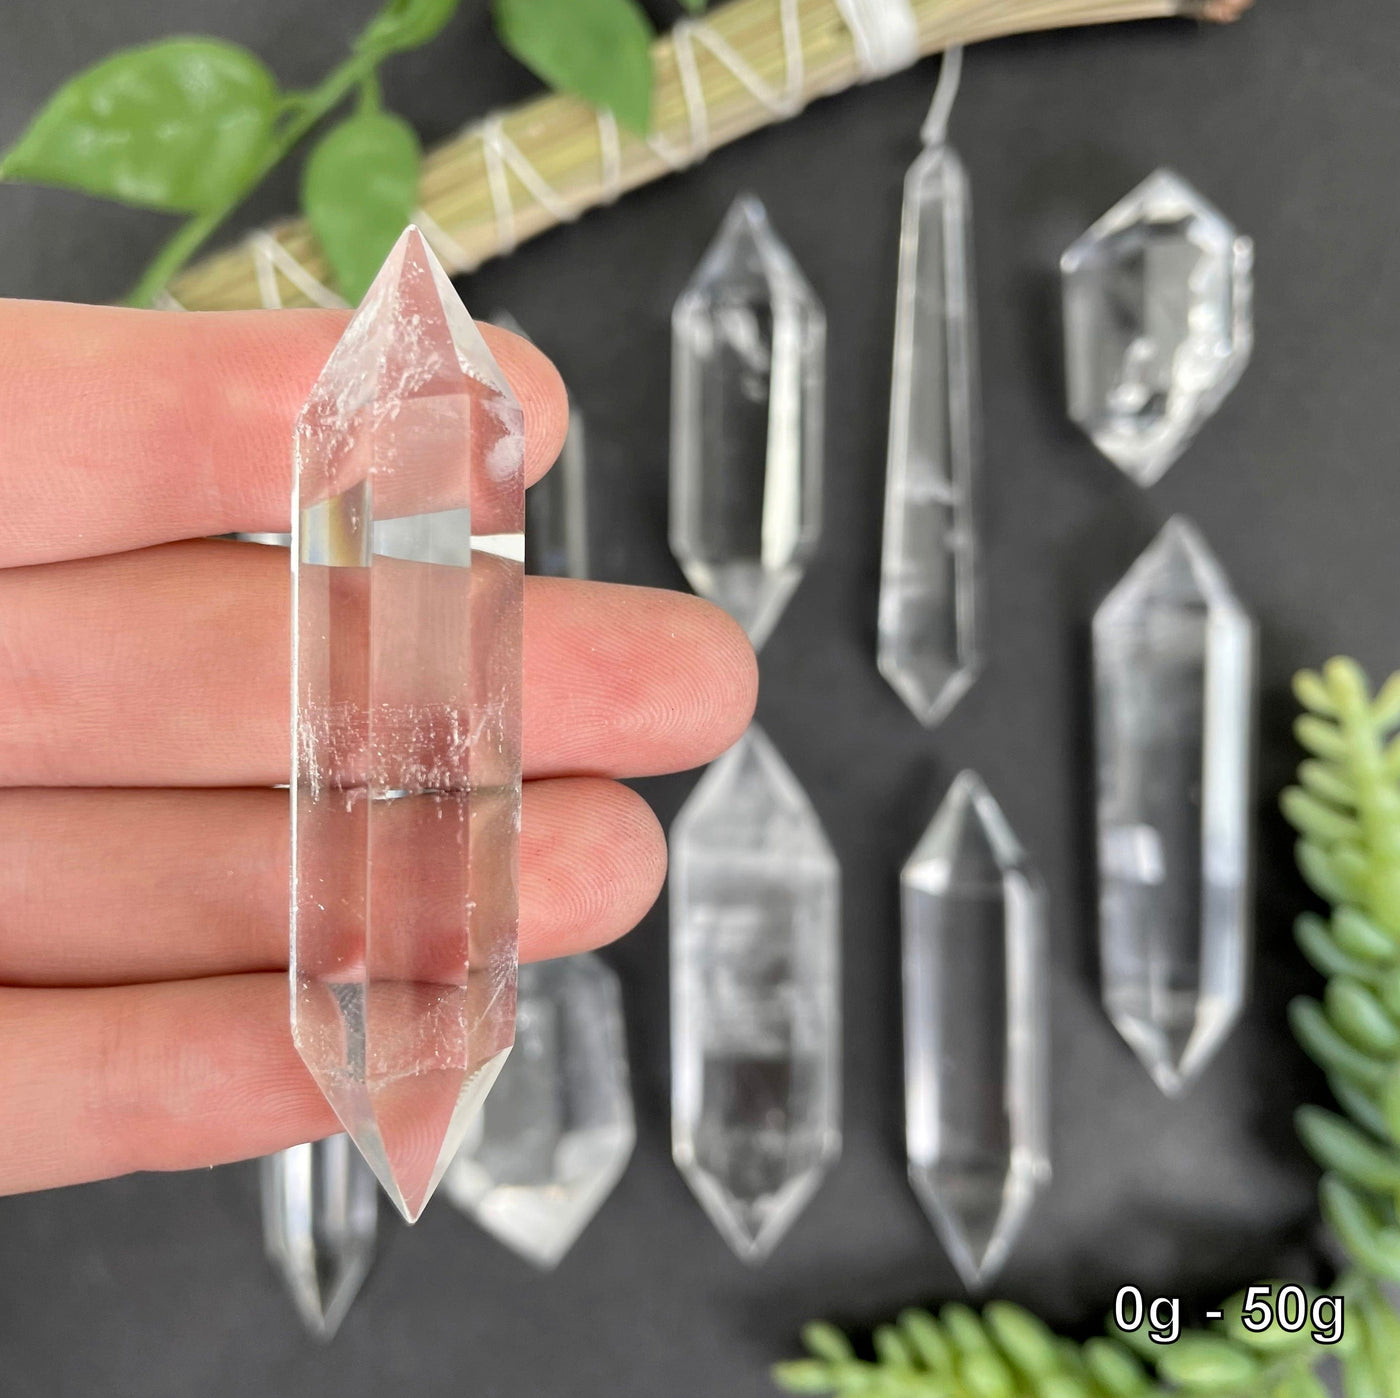 close up of one 0g - 50g crystal quartz point for size reference and details with many others in background